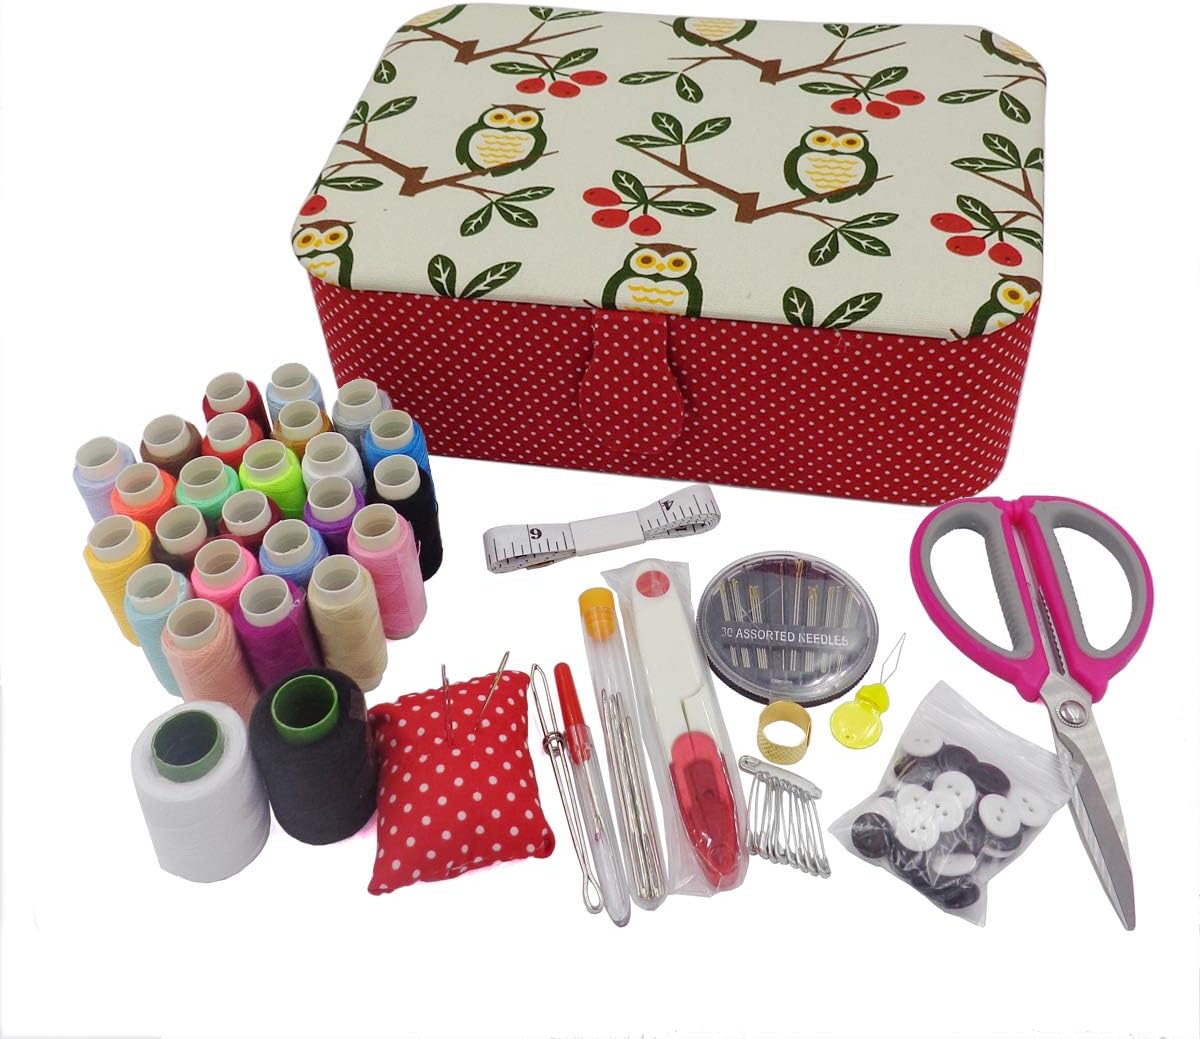 ISOTO Fabric Sewing Basket with Sewing Kit